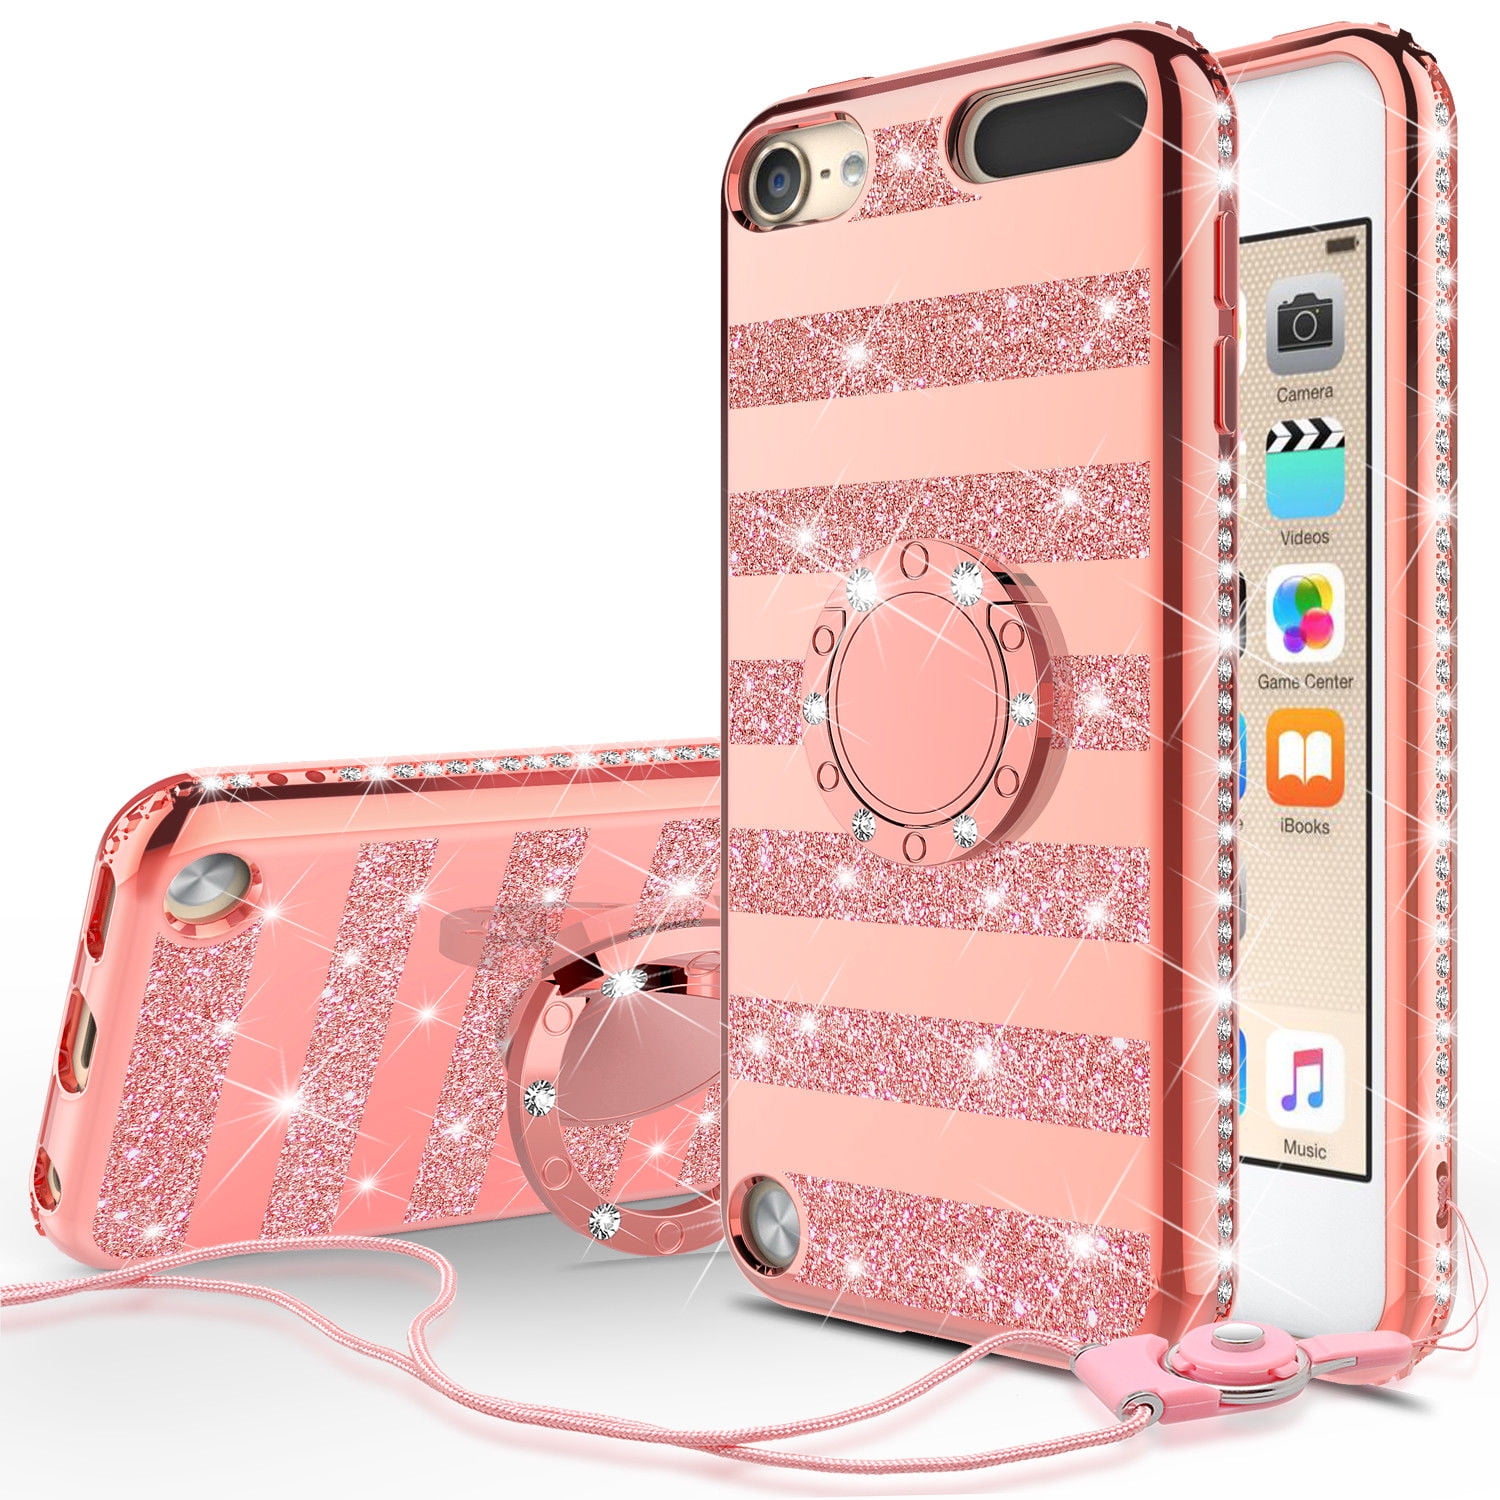 Pebish genoeg donor Apple iPod Touch 6 Case, iPod Touch 5 Case,Glitter Cute Phone Case Women  Girls with Kickstand, Bling Diamond Rhinestone Bumper Ring Stand Protective  Clear iPod Touch 5th/6th Gen. - Rose Gold Stripe -